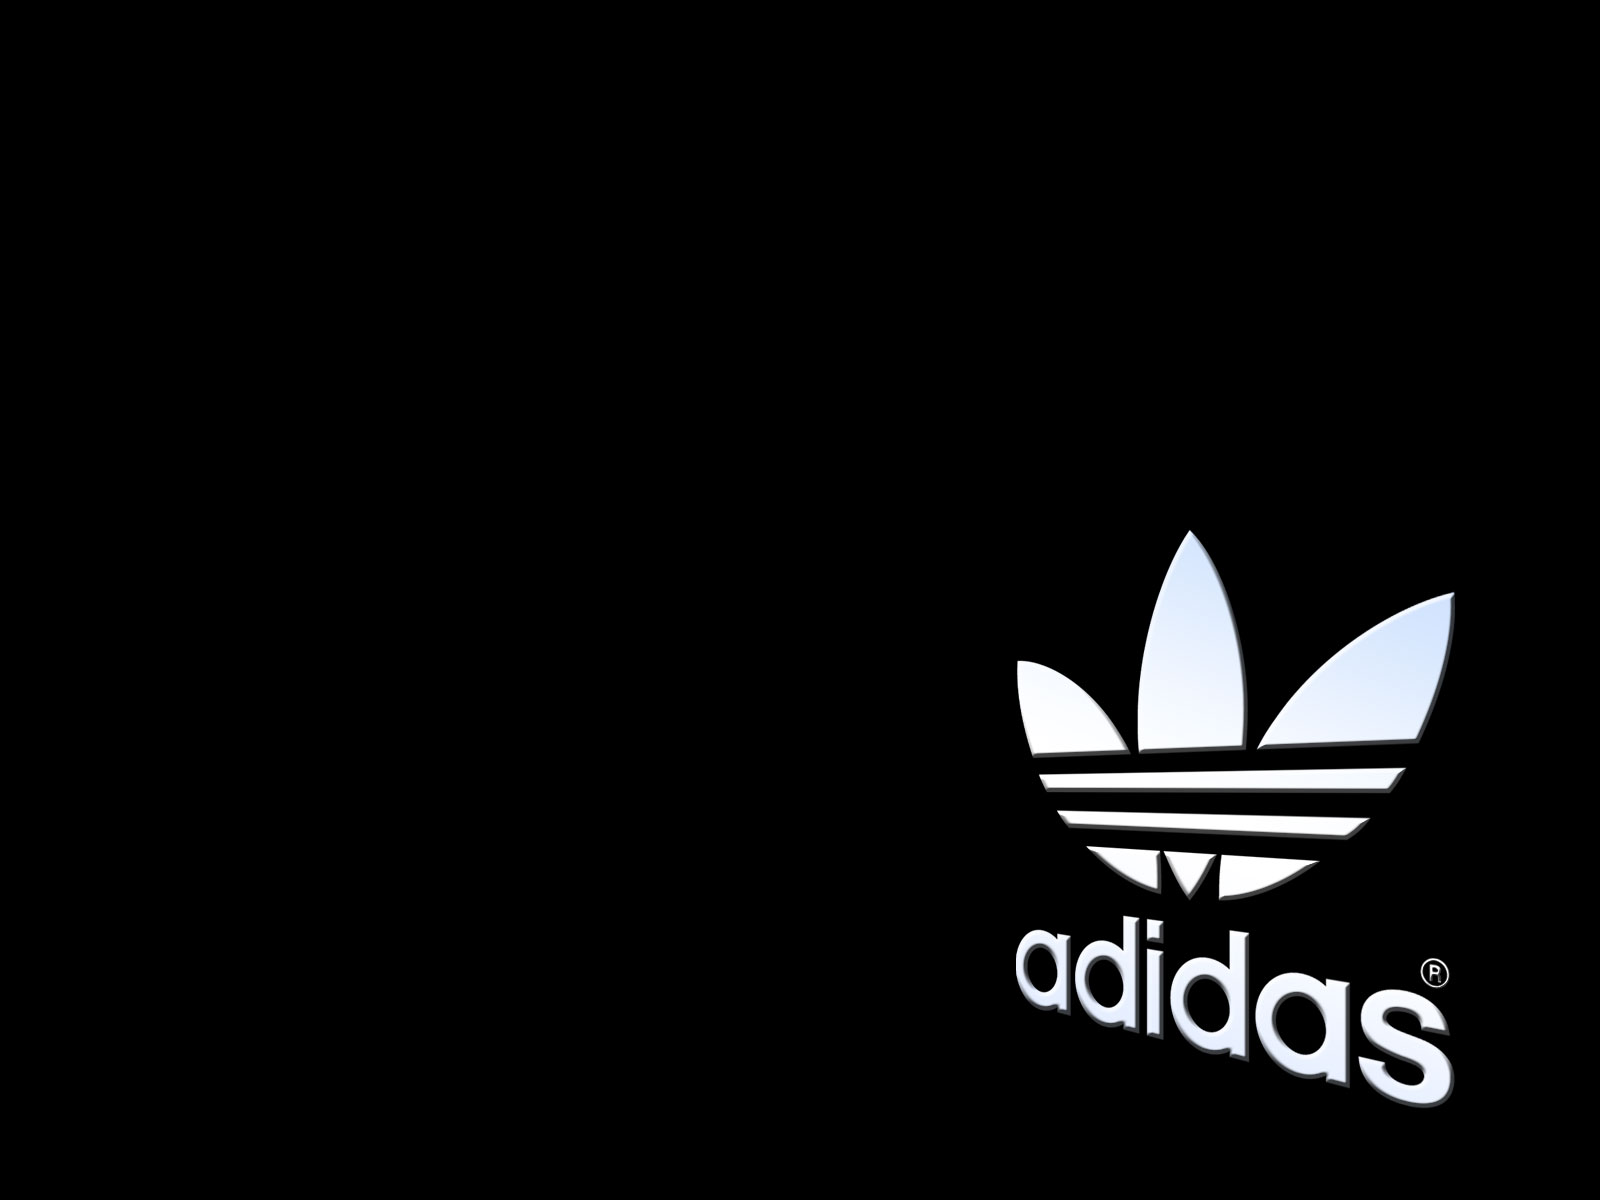 Adidas Logo Wallpaper And Image Pictures Photos